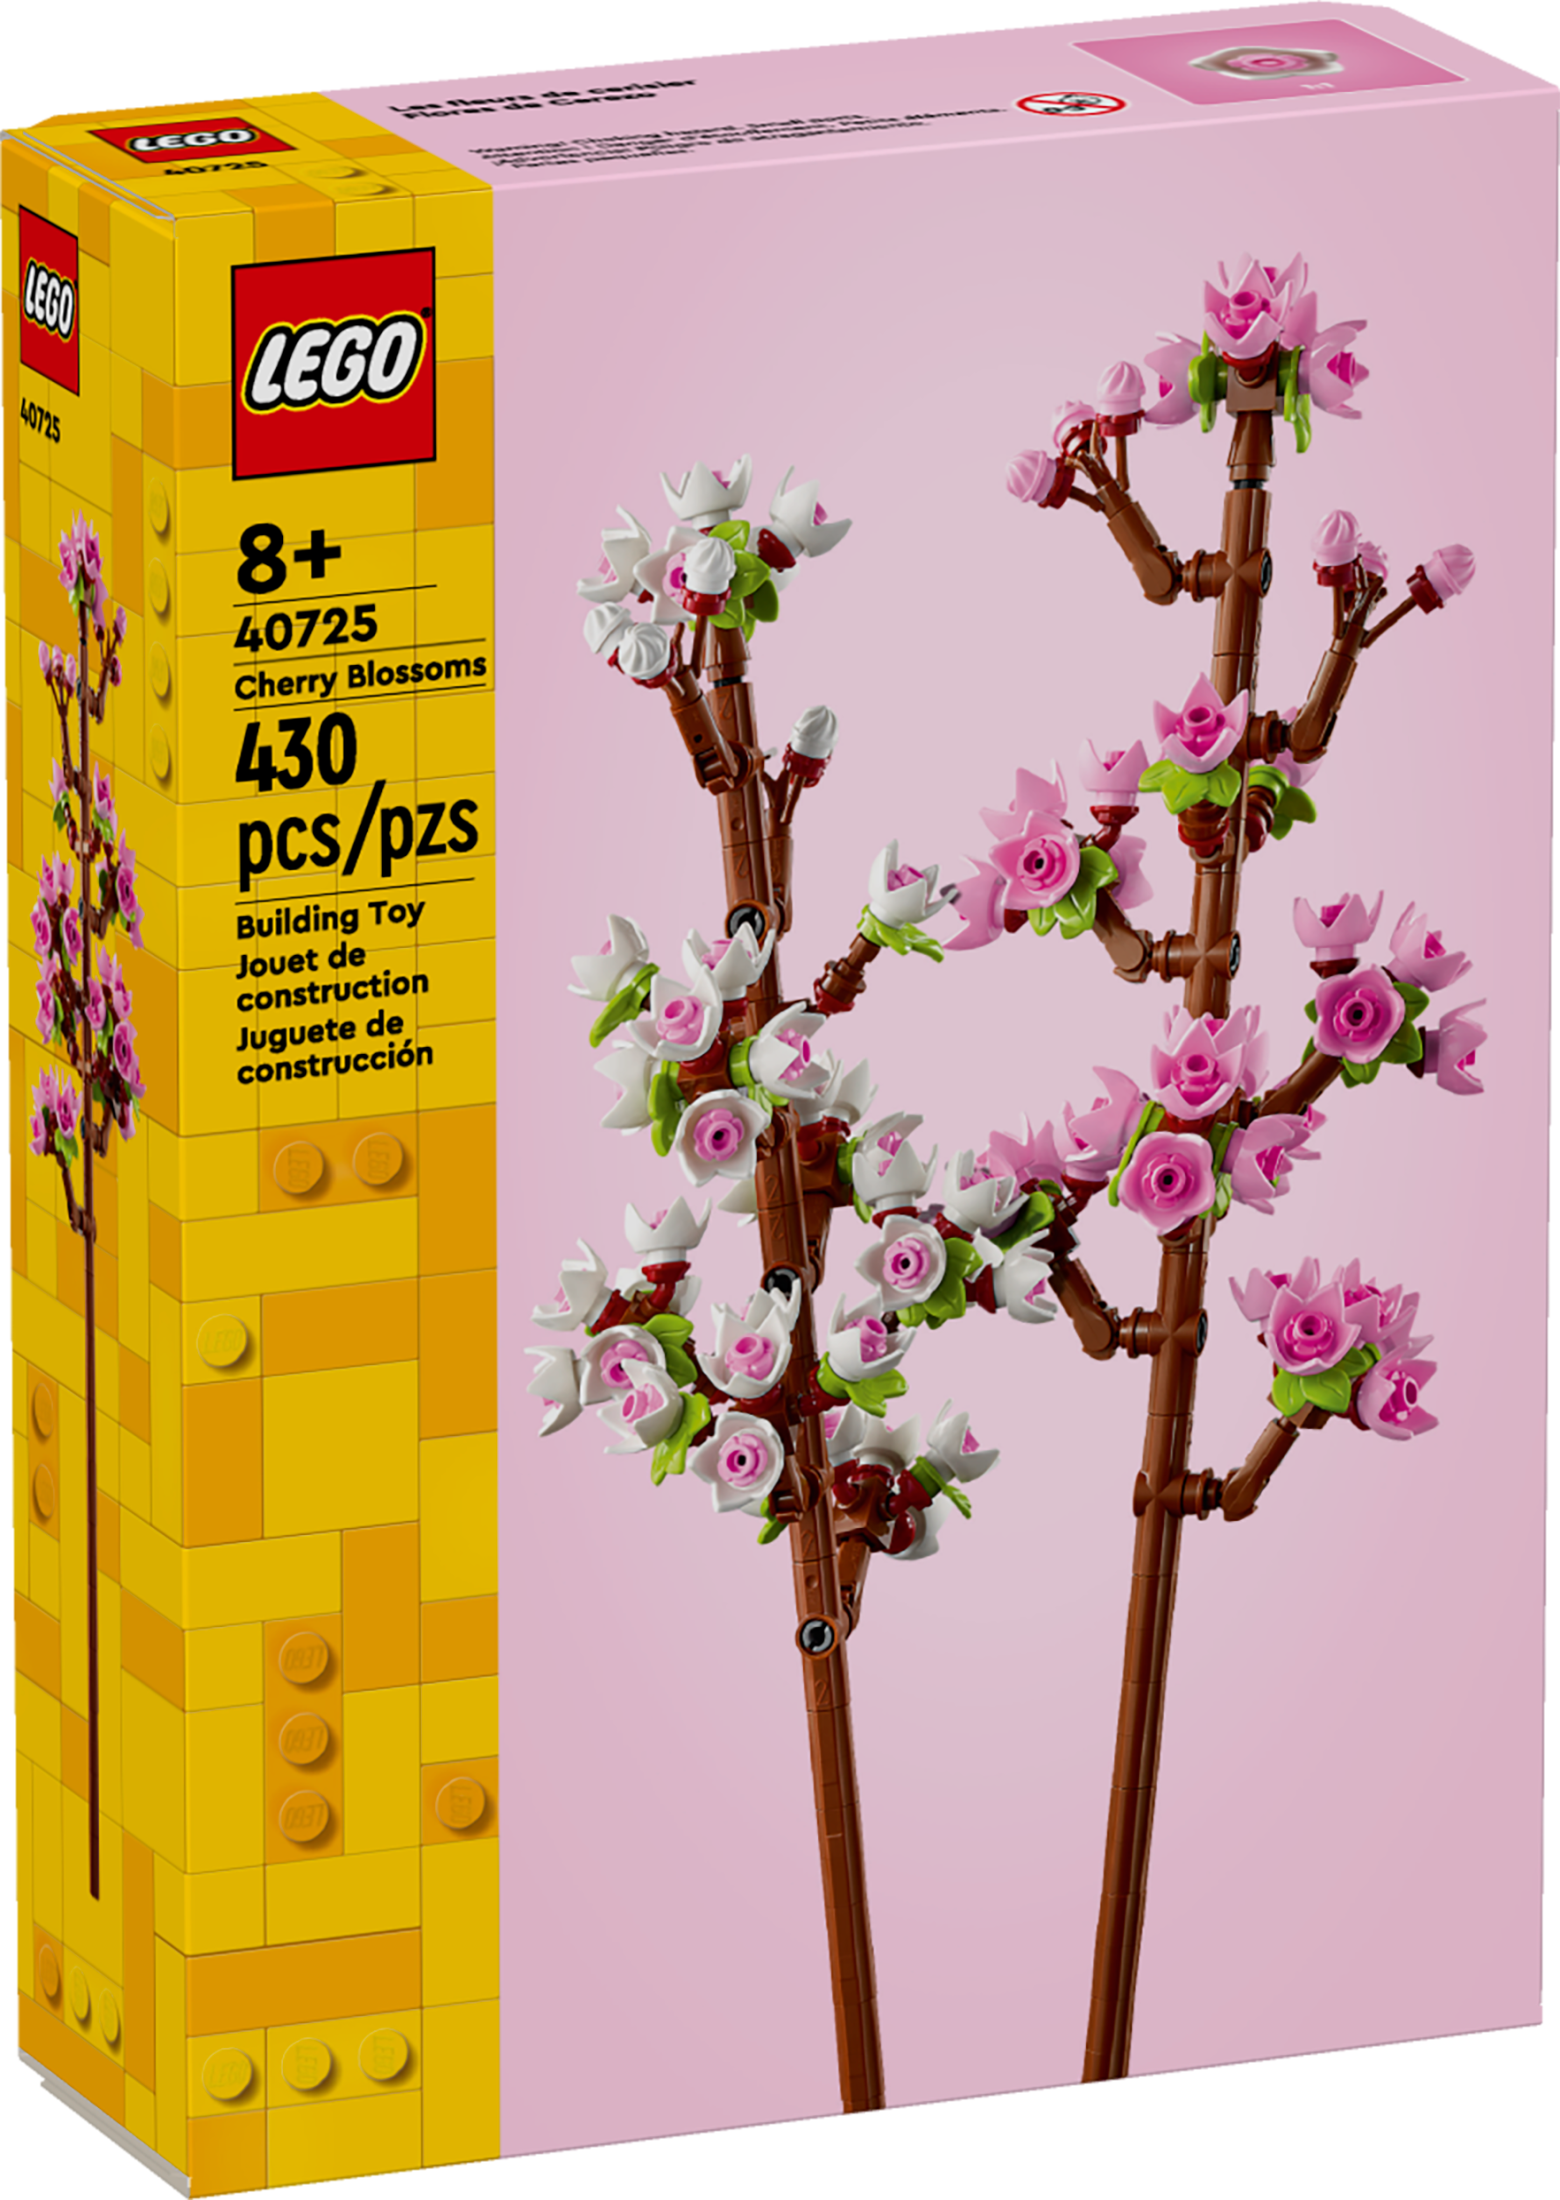 LEGO Cherry Blossoms Celebration Gift, Buildable Floral Display for Creative Kids, White and Pink Cherry Blossom, Spring Flower Gift for Girls and Boys Aged 8 and Up, 40725 - image 3 of 8